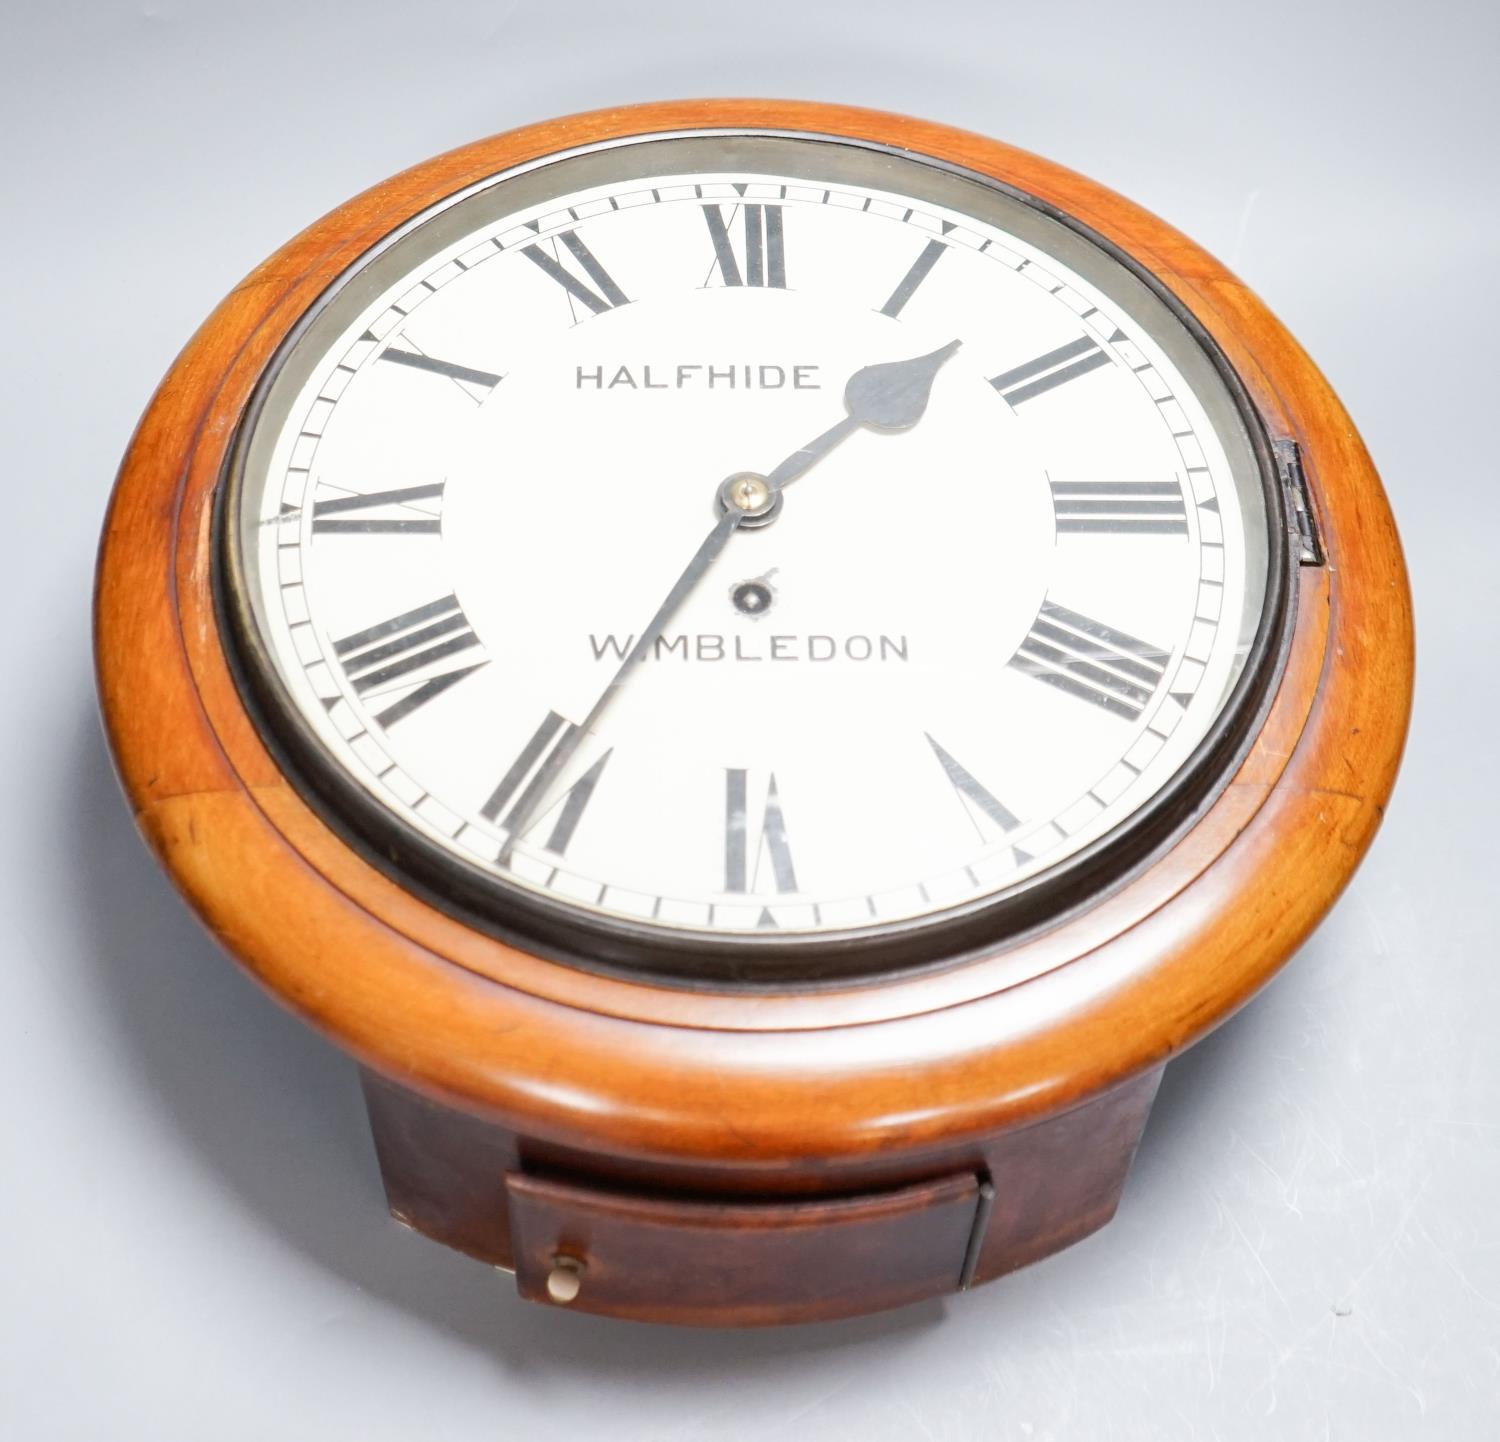 An early 20th century mahogany wall dial timepiece, Halfhide Wimbledon, German movement, 39.5 cm